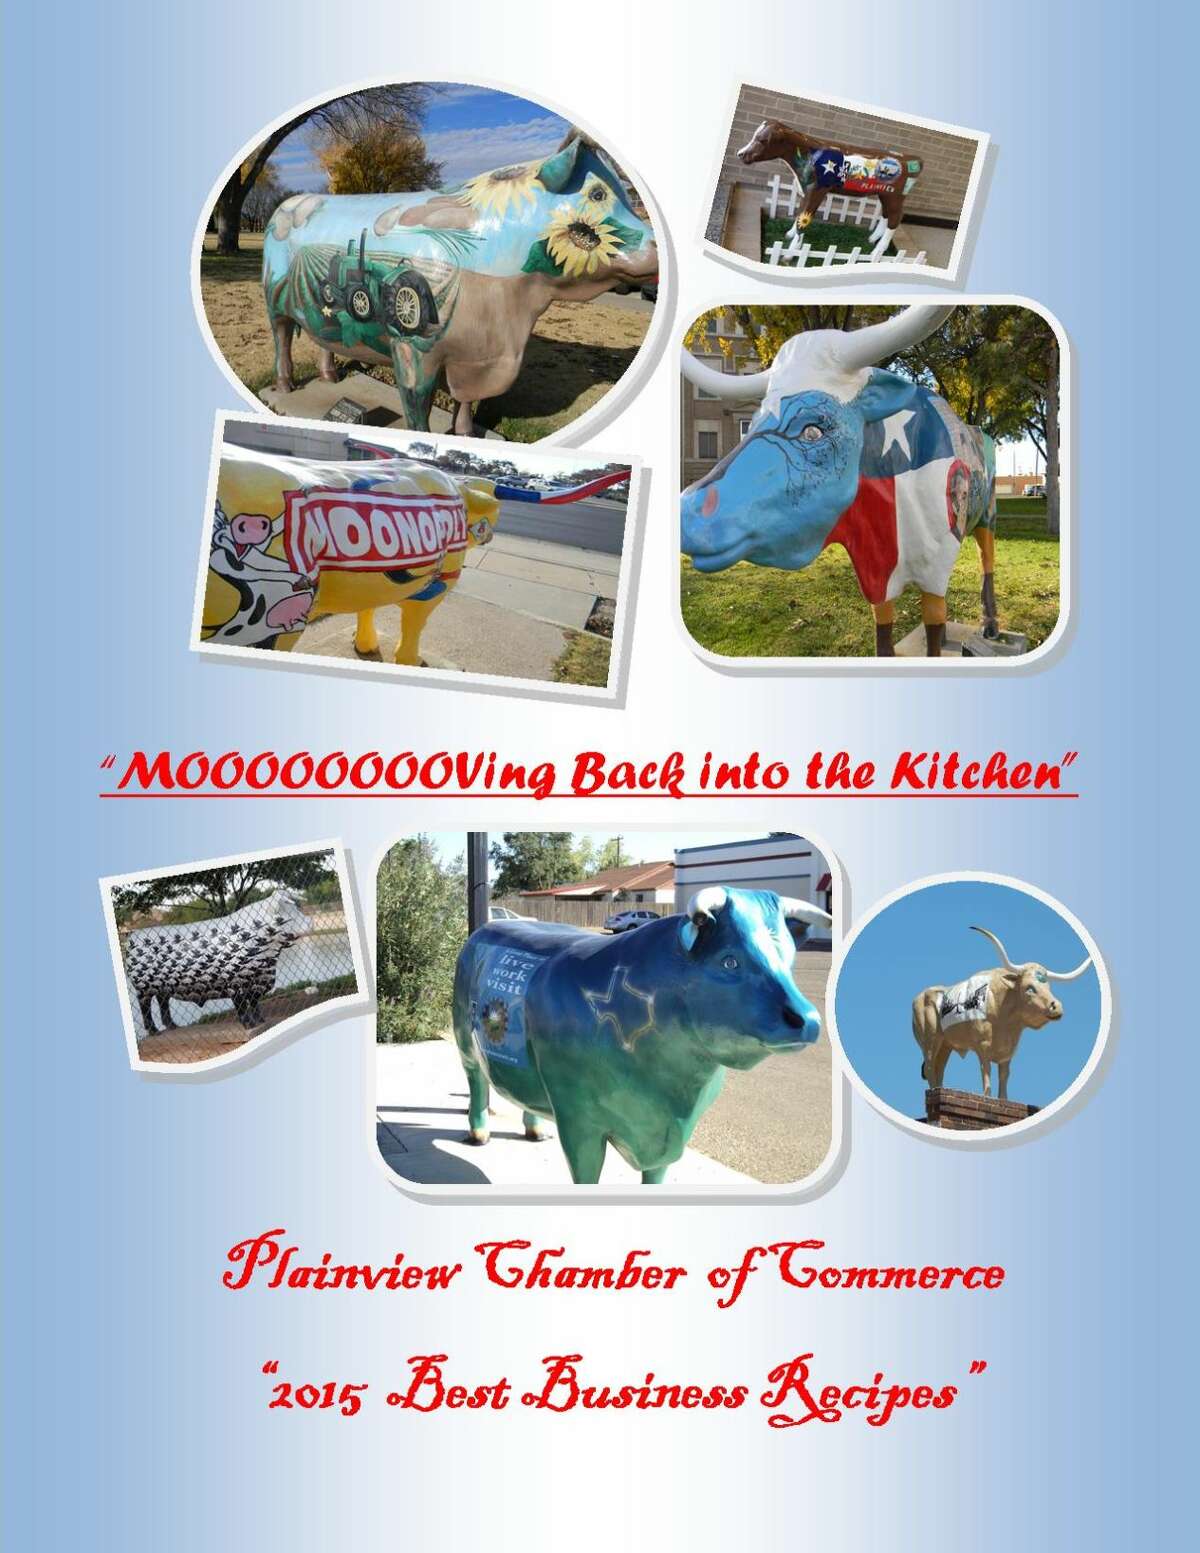 Courtesy Photo/Chamber of Commerce Shown is the planned cover for the Chamber of Commerce cookbook "Moooooving Back into the Kitchen: Plainview Chamber of Commerce 2015 Best Business Recipes." For its first-ever cookbook project, the Chamber plans to collect recipes from members.